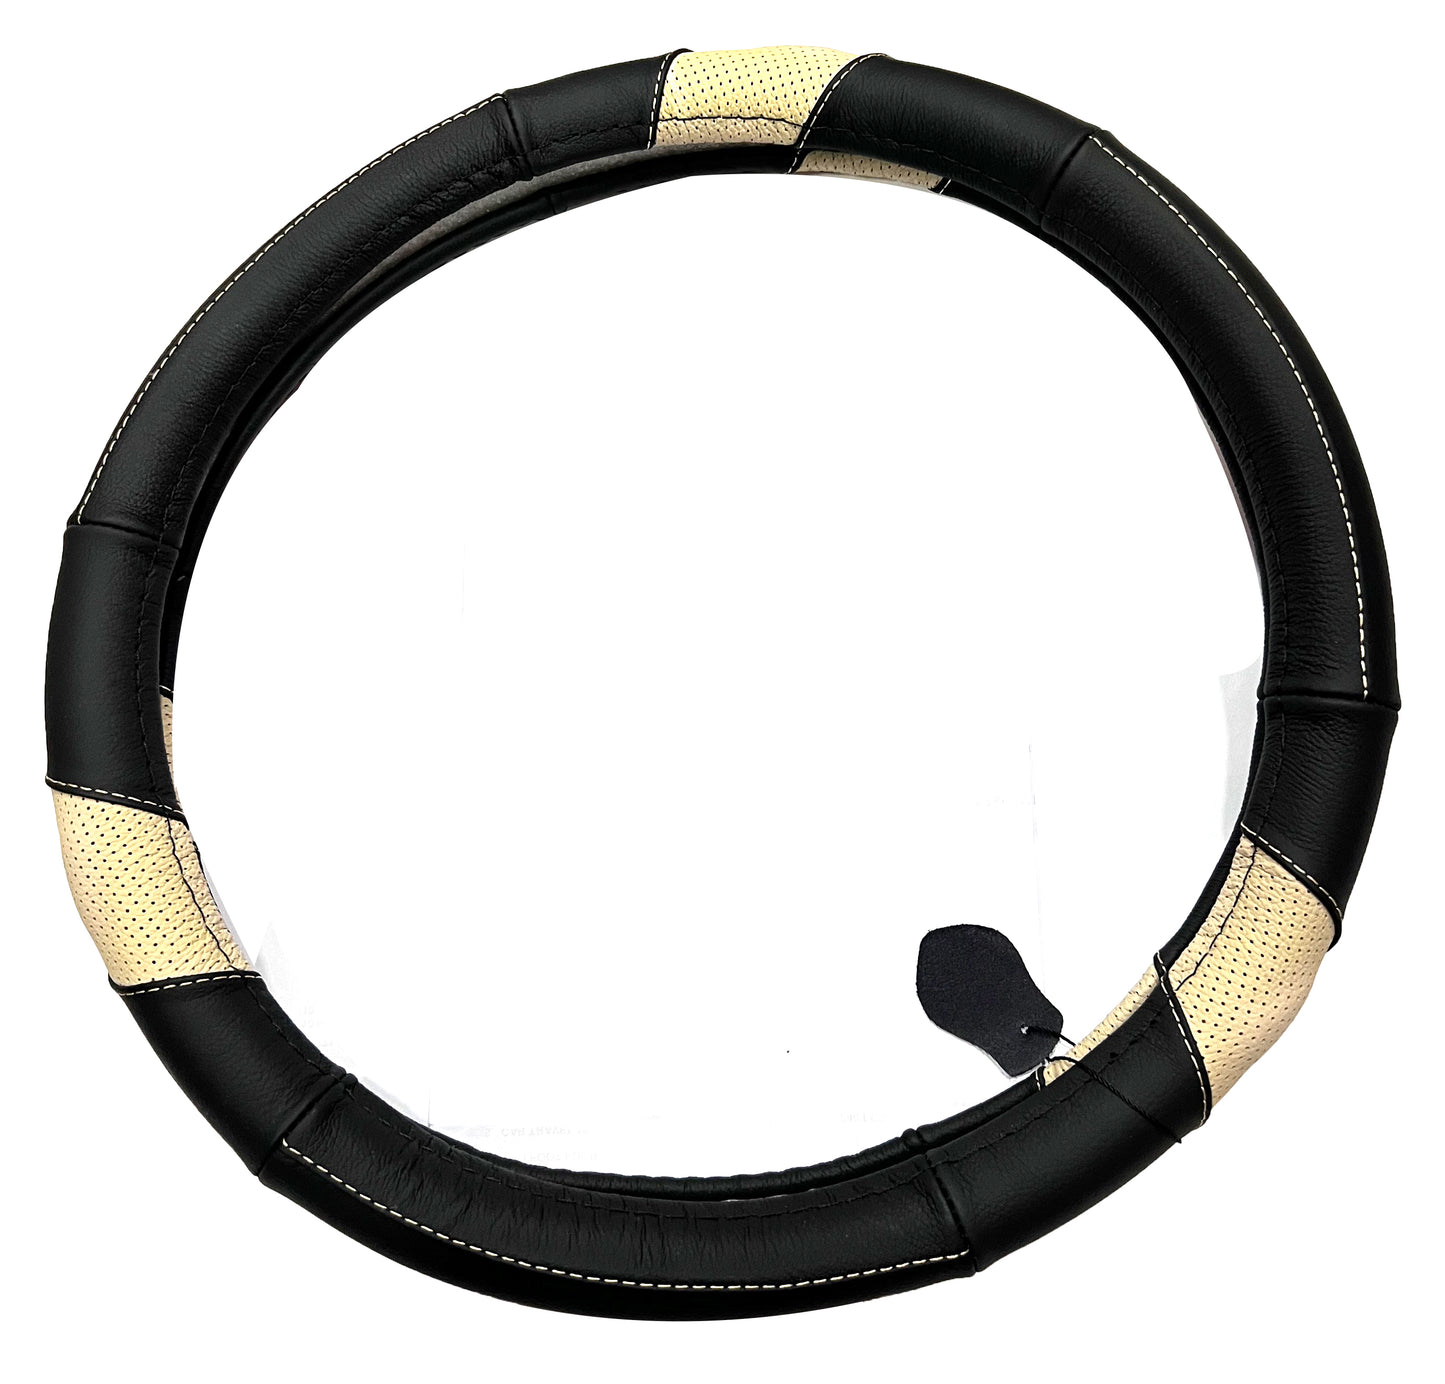 Oshotto SC-011-A Leather Car Steering Cover (Black, Beige,Medium)